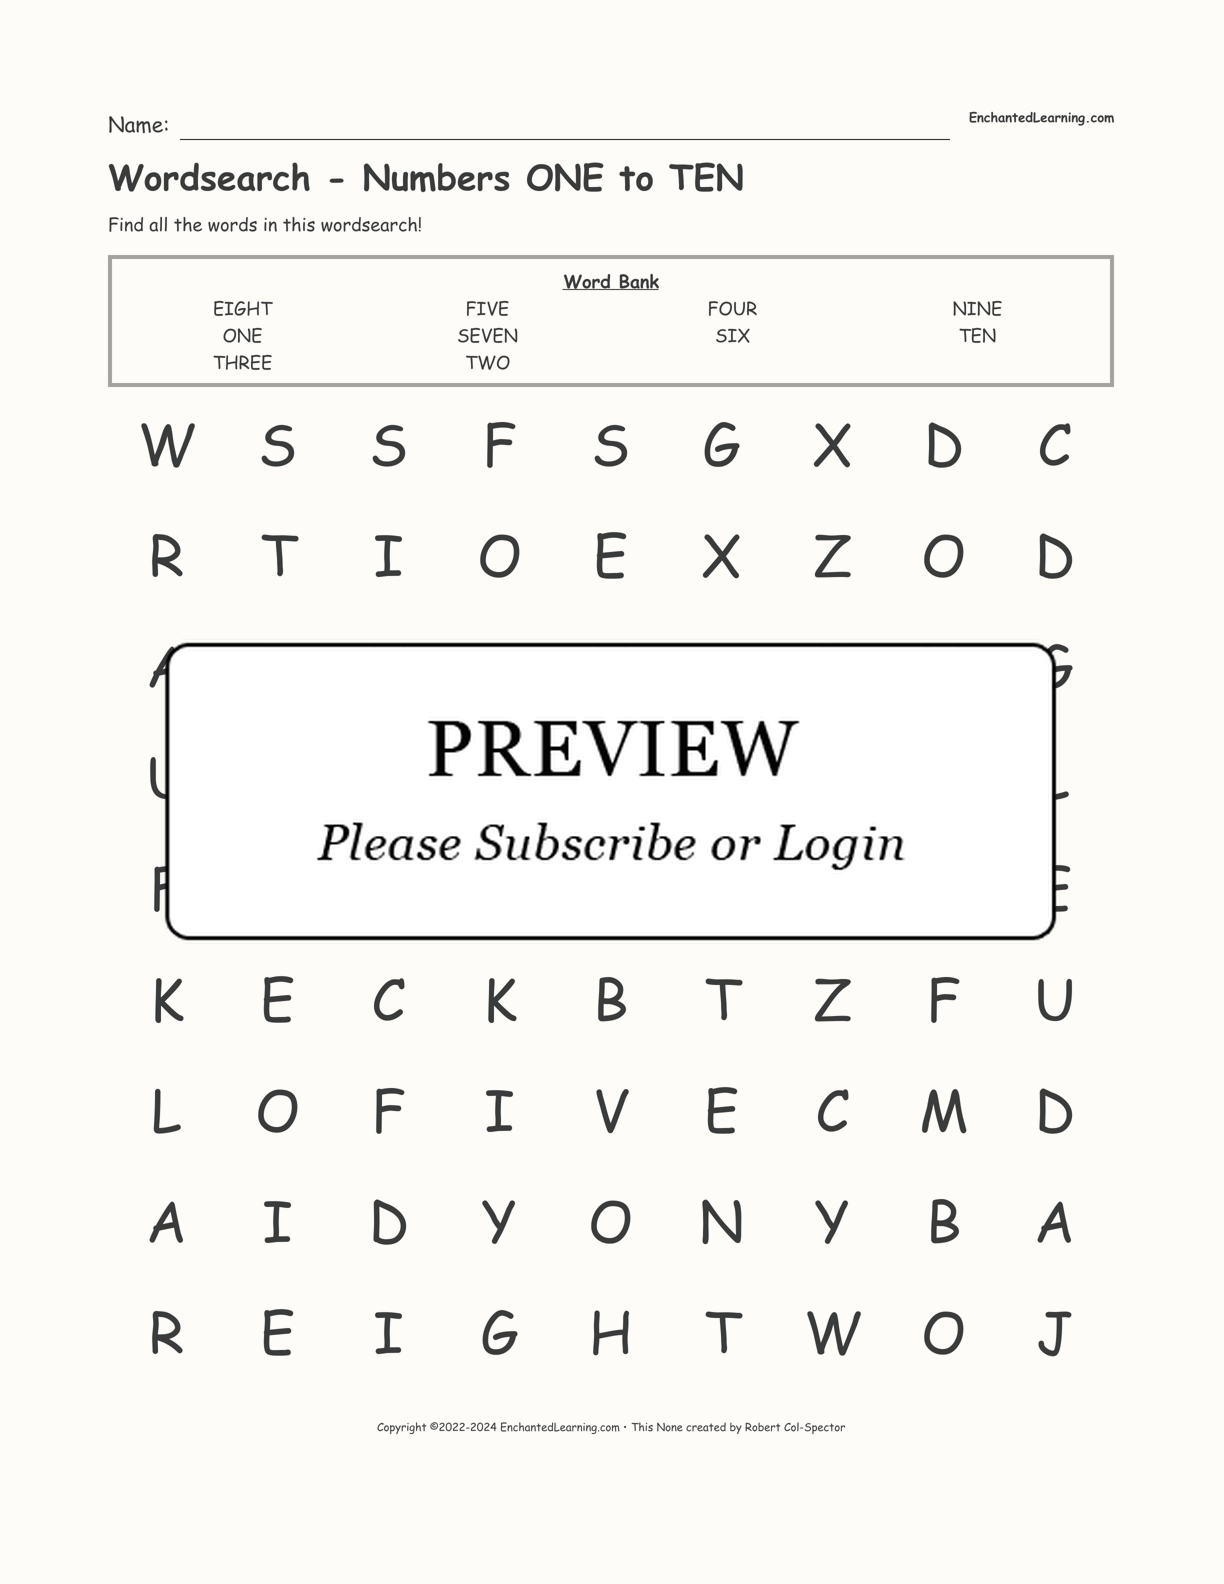 Wordsearch - Numbers ONE to TEN interactive worksheet page 1